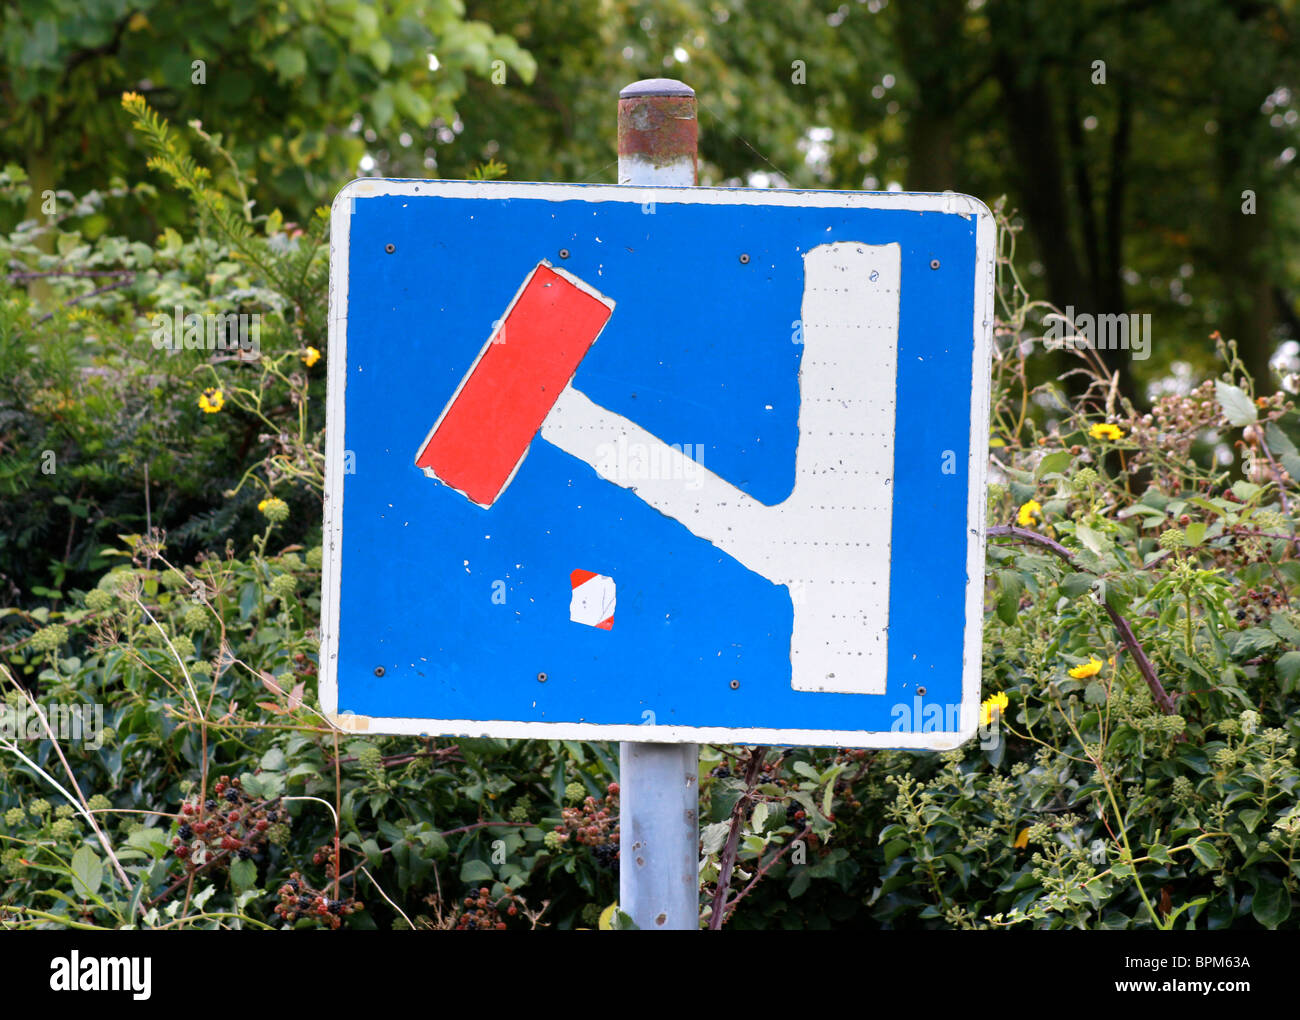 No through road sign against a hedge Stock Photo